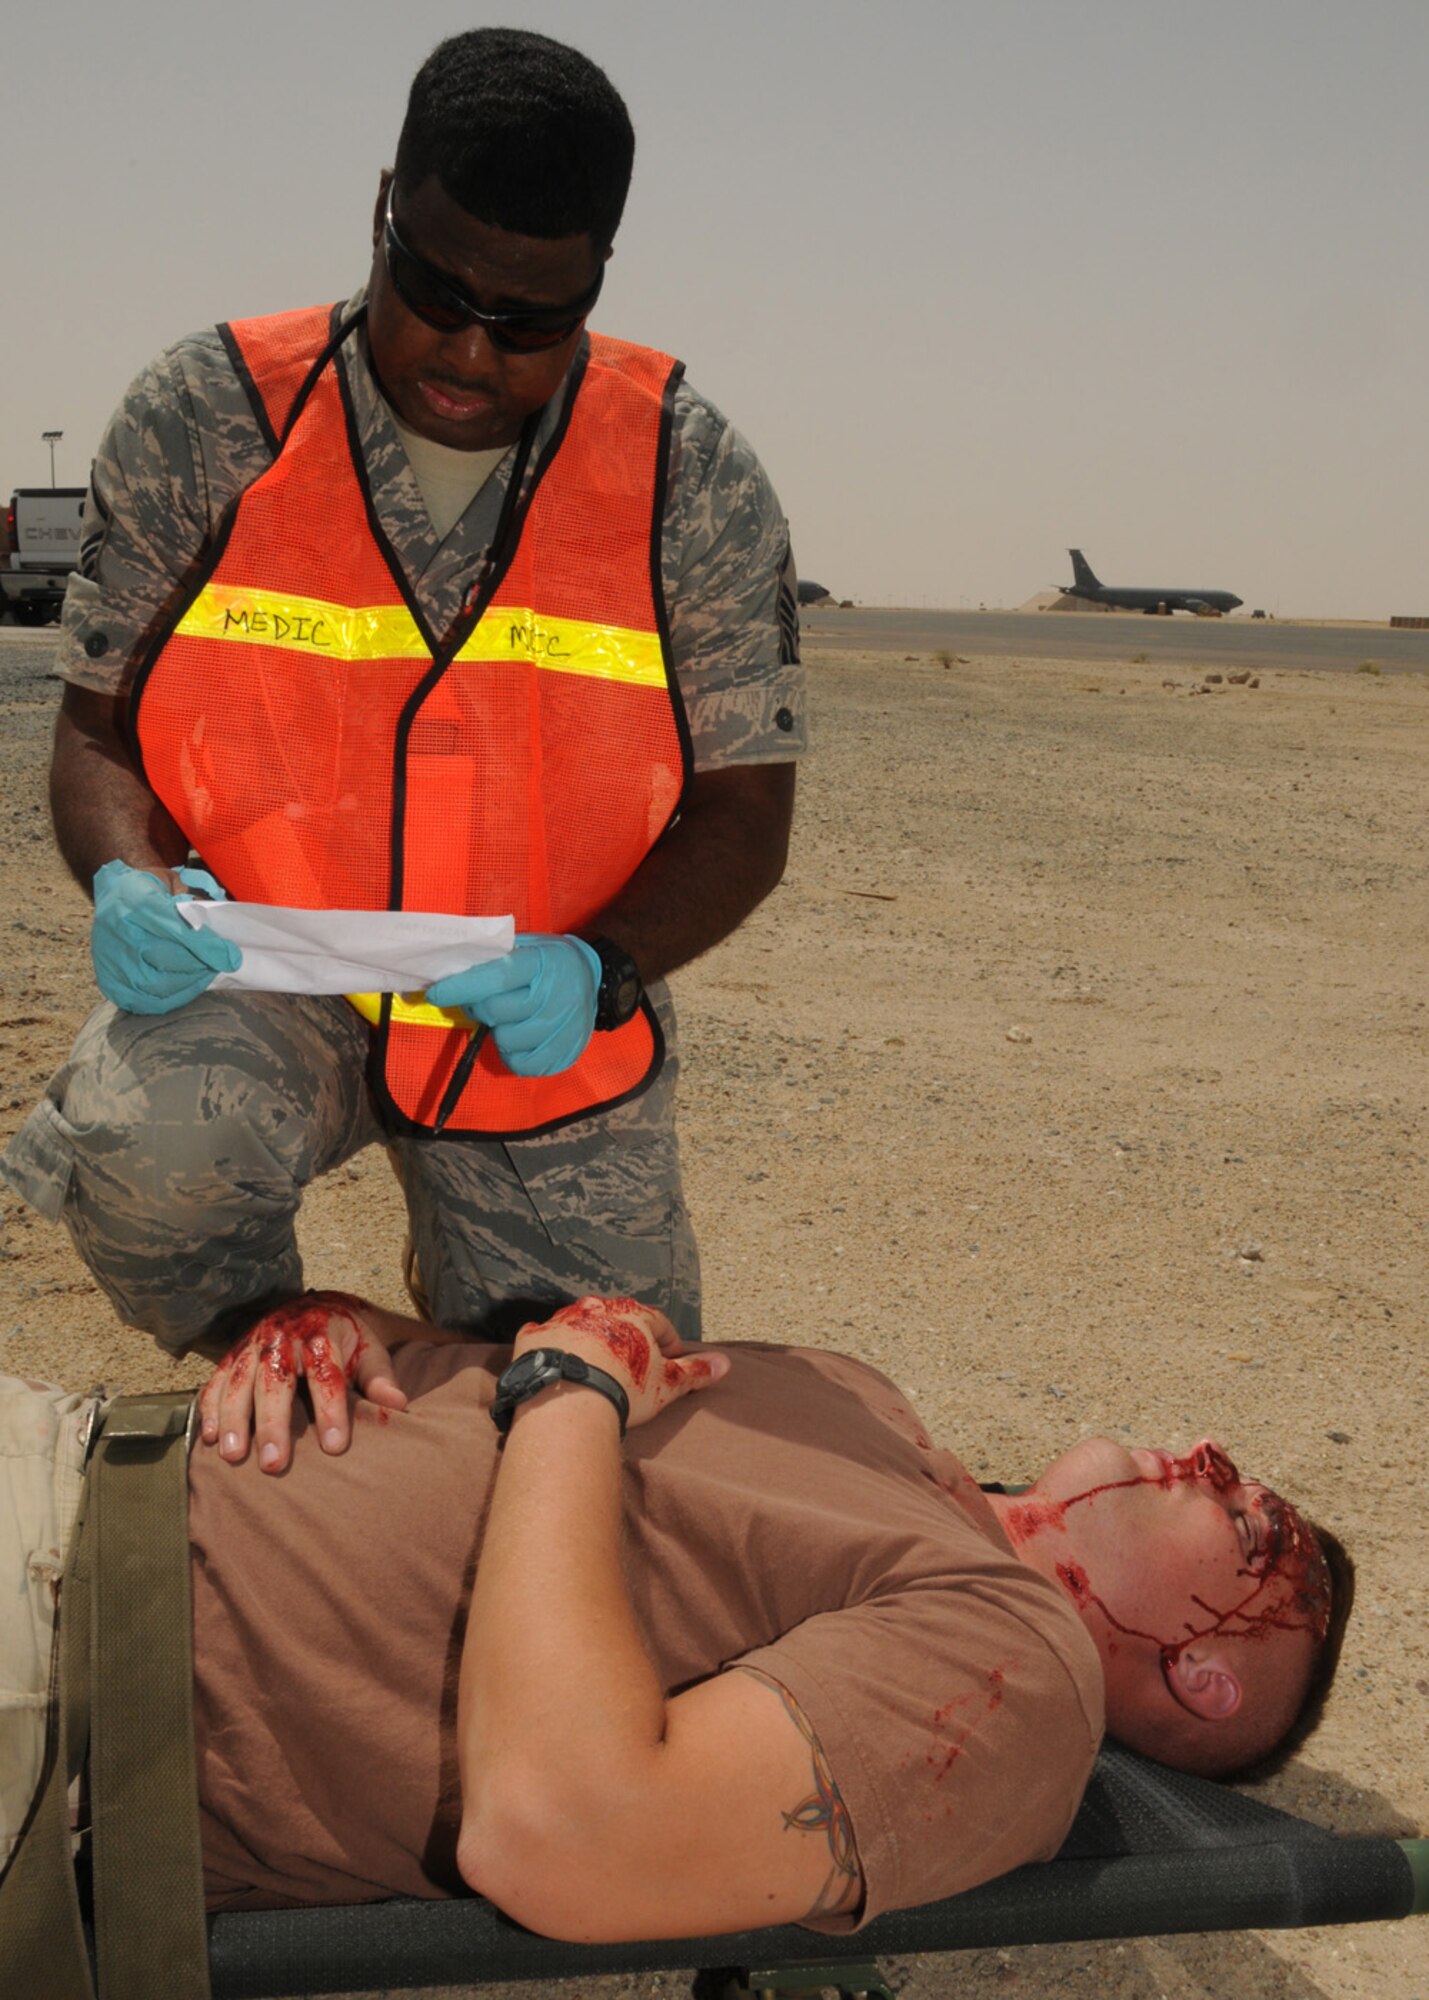 SOUTHWEST ASIA -- Master Sgt. Kevin Mathews, 386th Expeditionary Medical Group, assesses a victim during a Base Response and Readiness Exercise at an air base in Southwest Asia, April 13. During the exercise, the patients are given a printout of their wounds and a description of how they are supposed to act during the exercise, and the emergency responders treat the victim accordingly. Sergeant Mathews is currently deployed from Ramstein Air Base, Germany, and is originally from Atlanta. (U.S. Air Force photo/ Senior Airman Courtney Richardson)